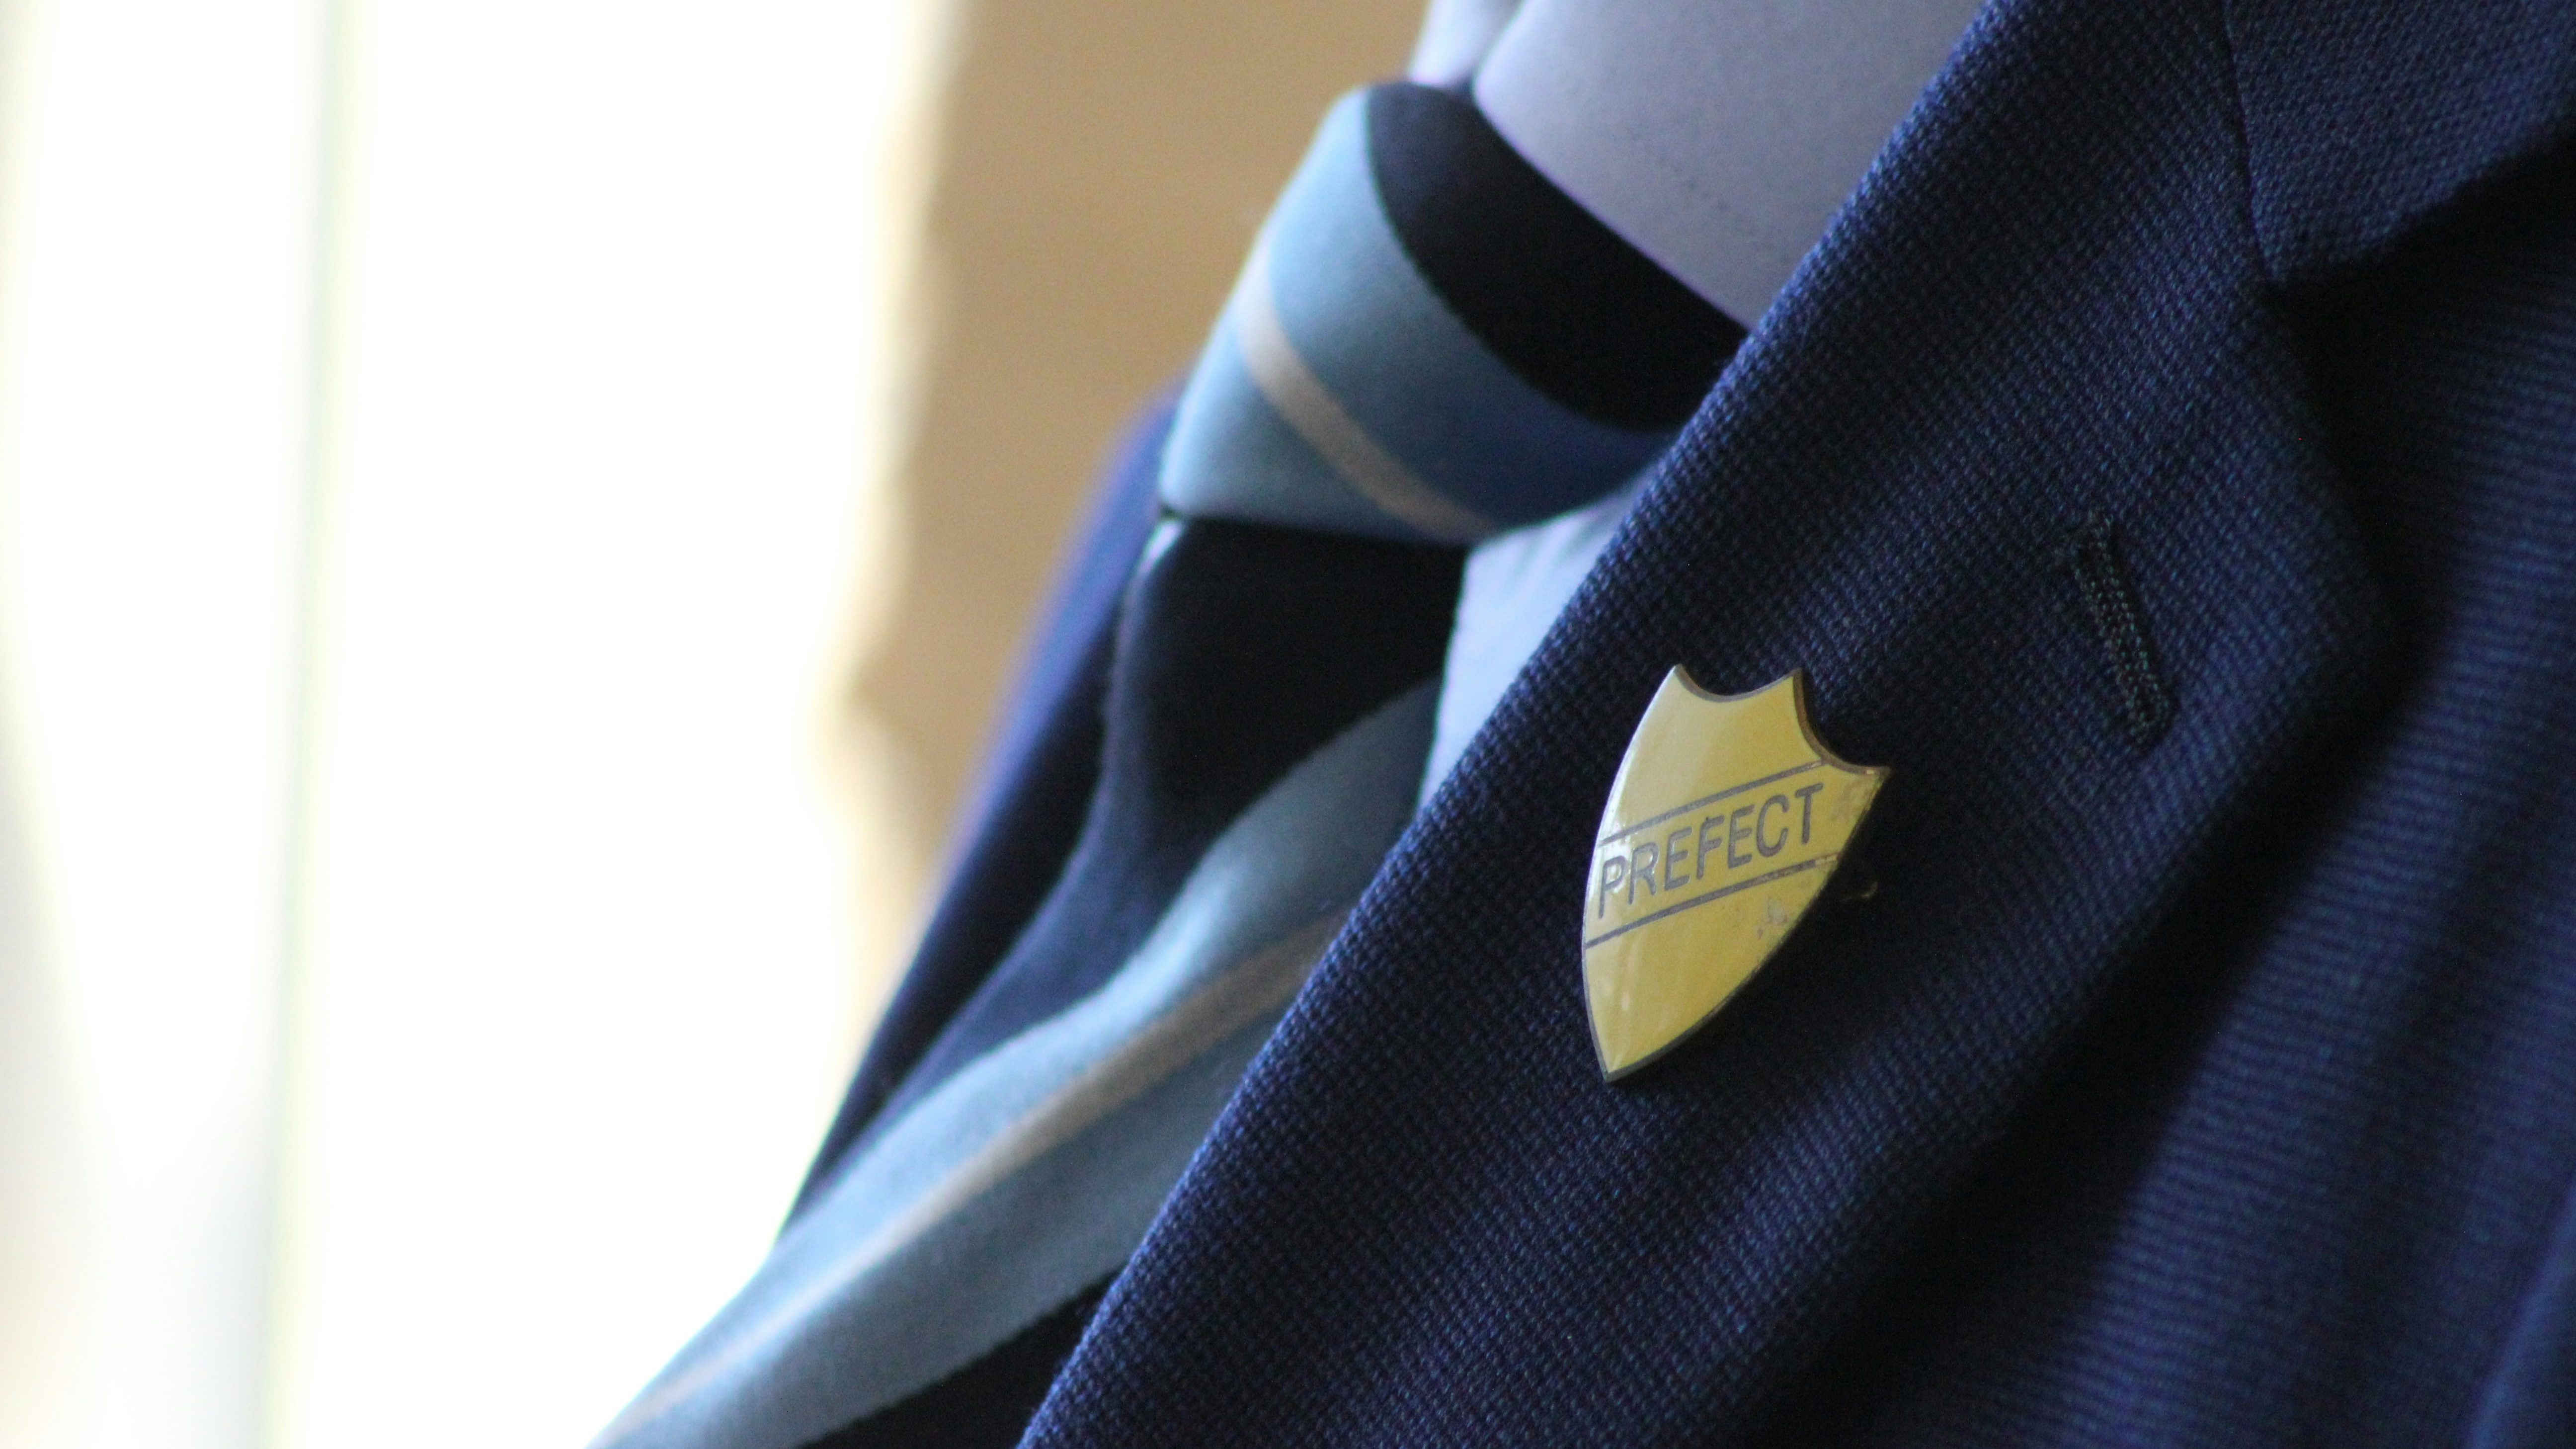 SAHRC finds that school uniform policies infringe on right to dignity